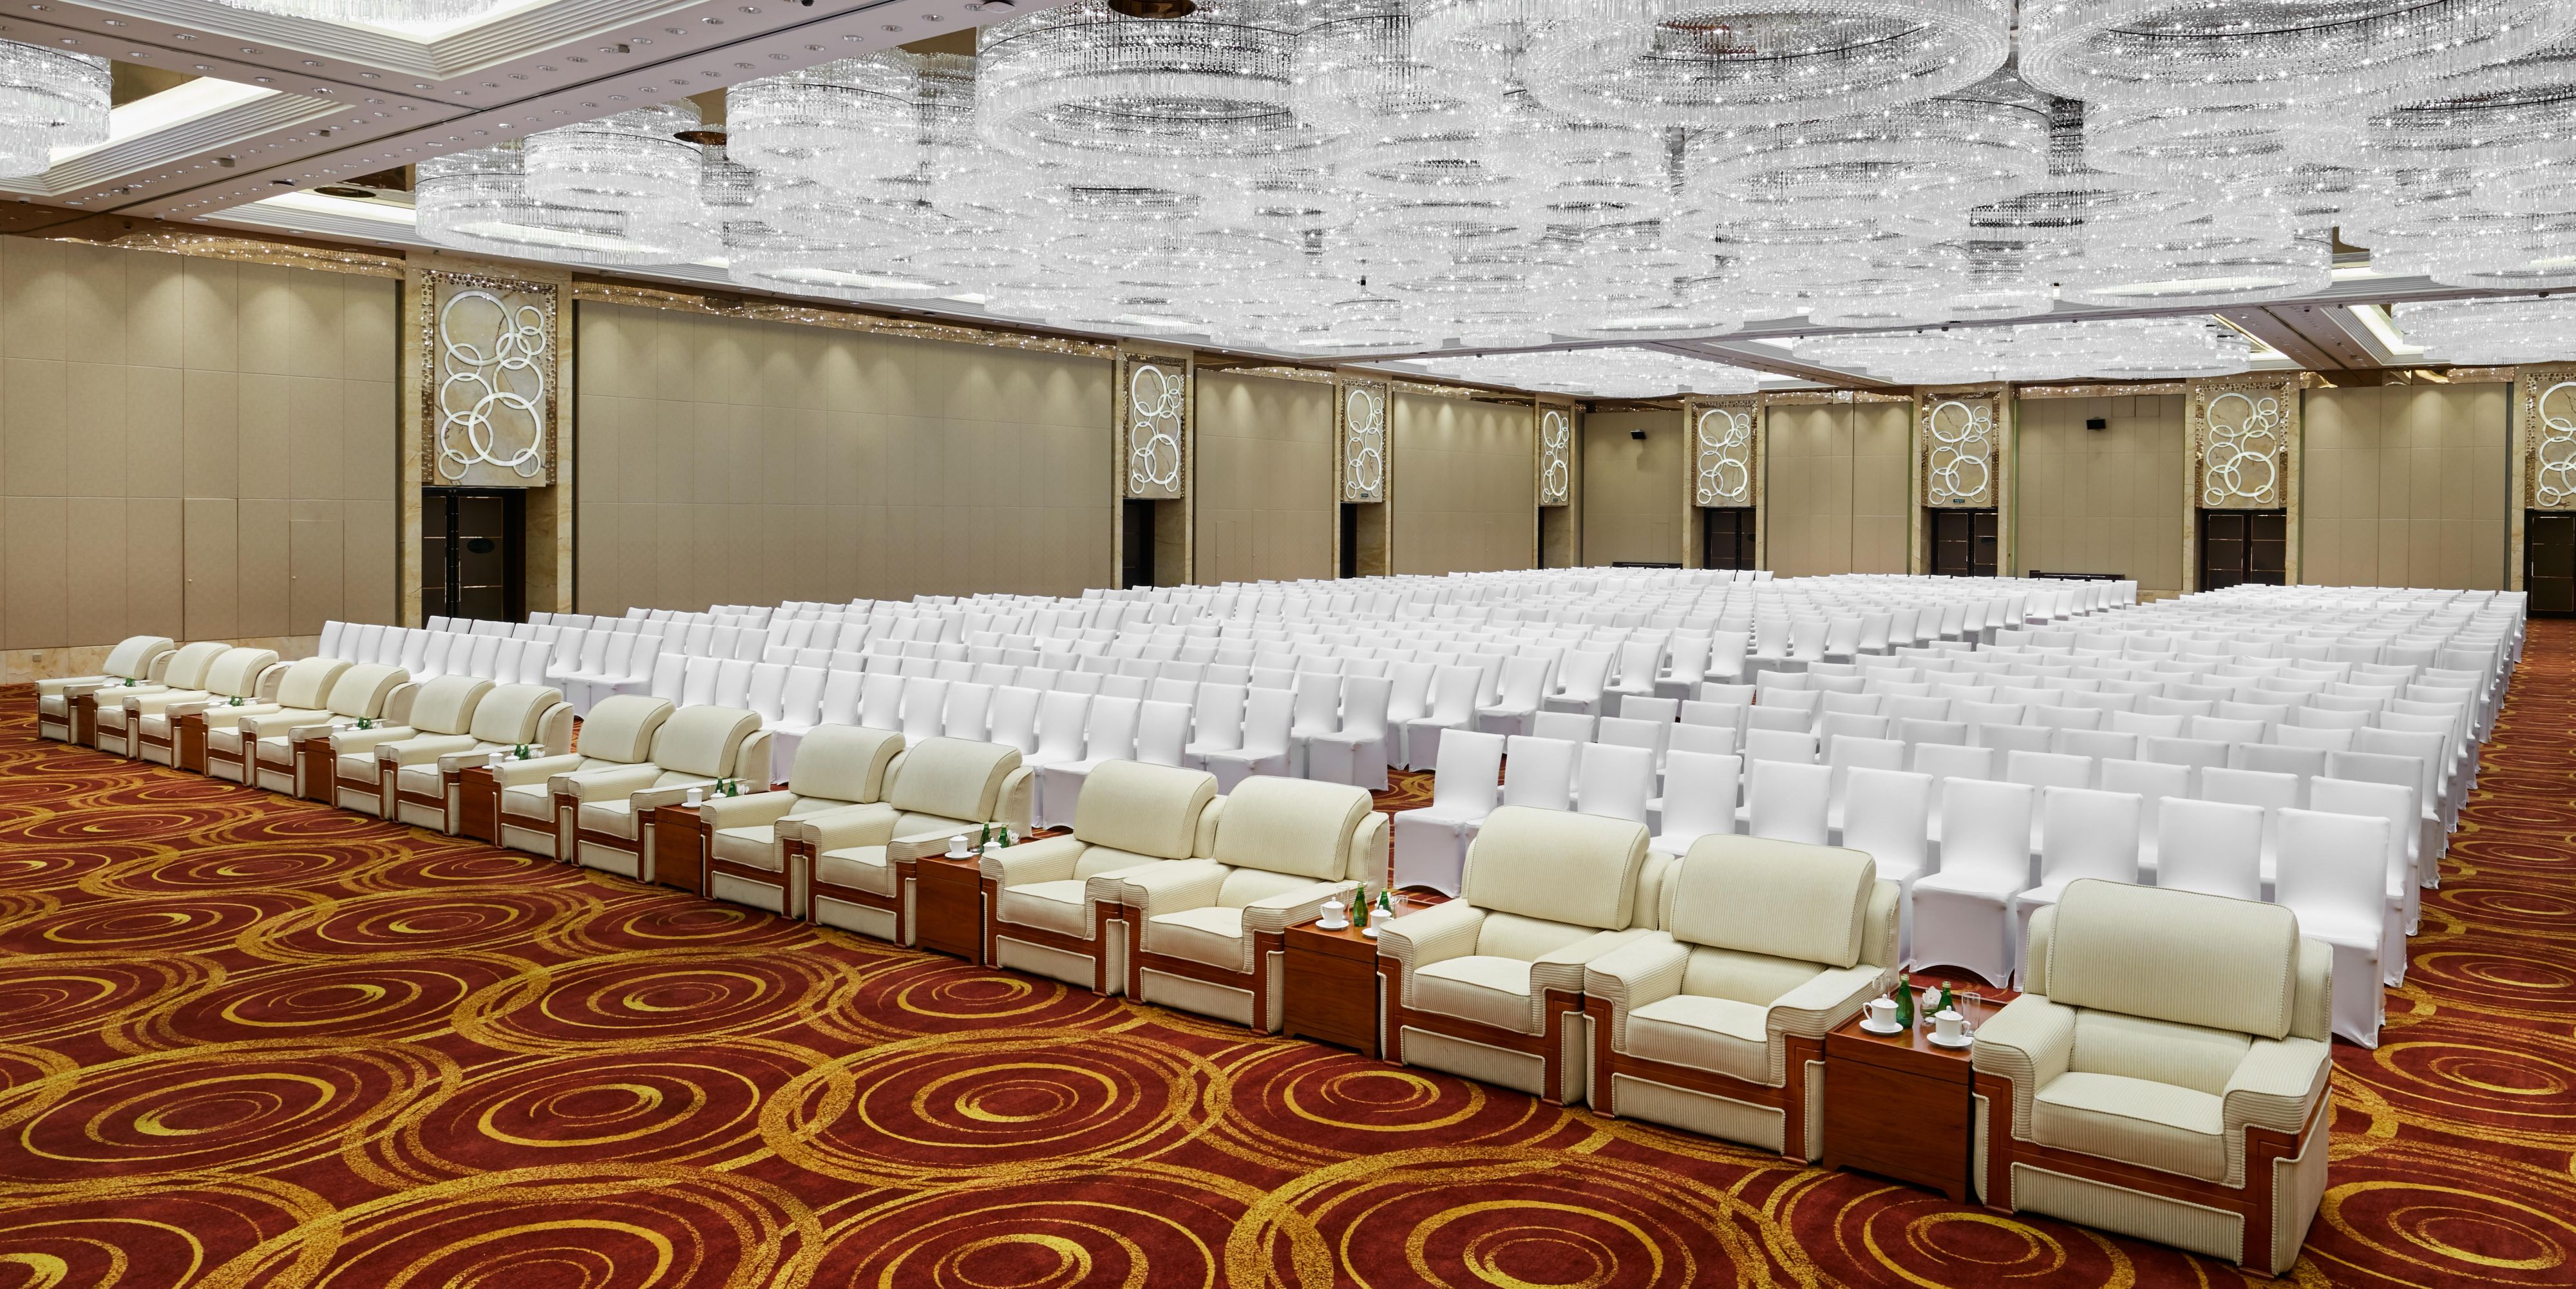 With its 6,000 square meters of meeting and conference areas, hotel is the perfect venue for an inspiring meeting or event. The 1,780㎡ Hangzhou Ballroom that had hosted the Business 20 Summit 2016, 943㎡ International hall and another 20 function rooms of different sizes makes InterContinental Hangzhou the preferred meeting venue in the city.